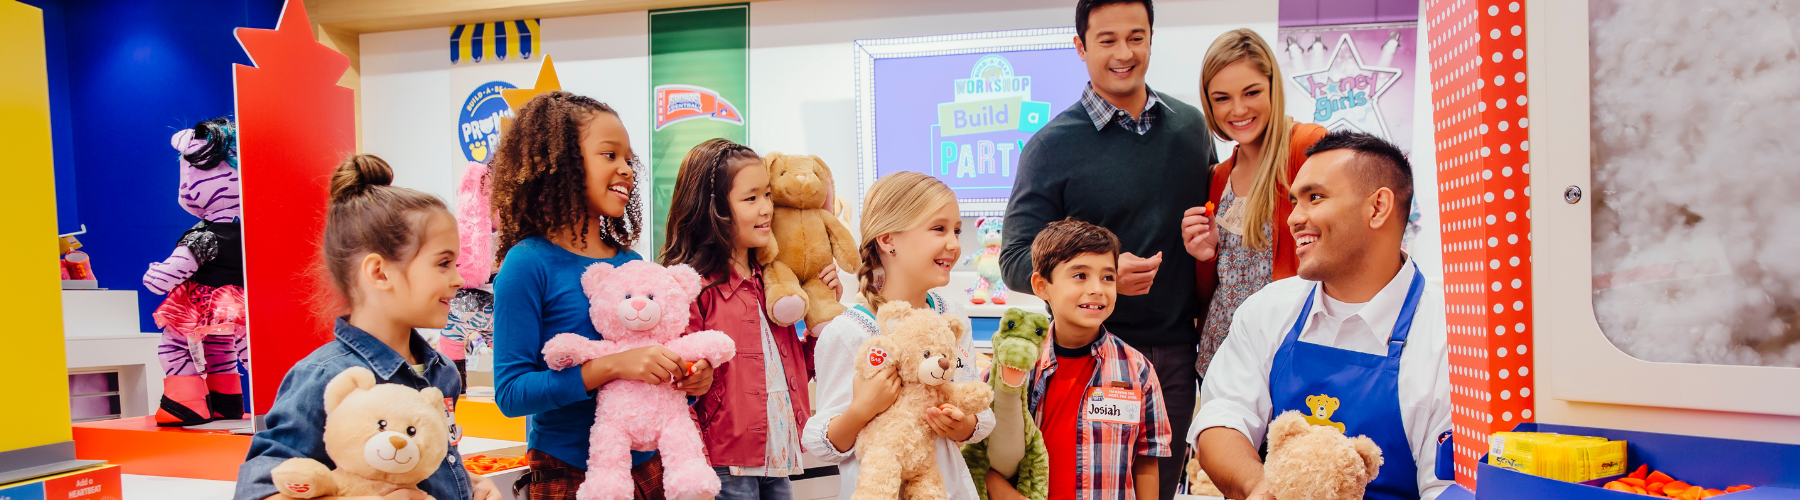 BUILD-A-BEAR WORKSHOP | CHIEF WORKSHOP MANAGER & PART TIME/CASUAL ROLES AVAILABLE